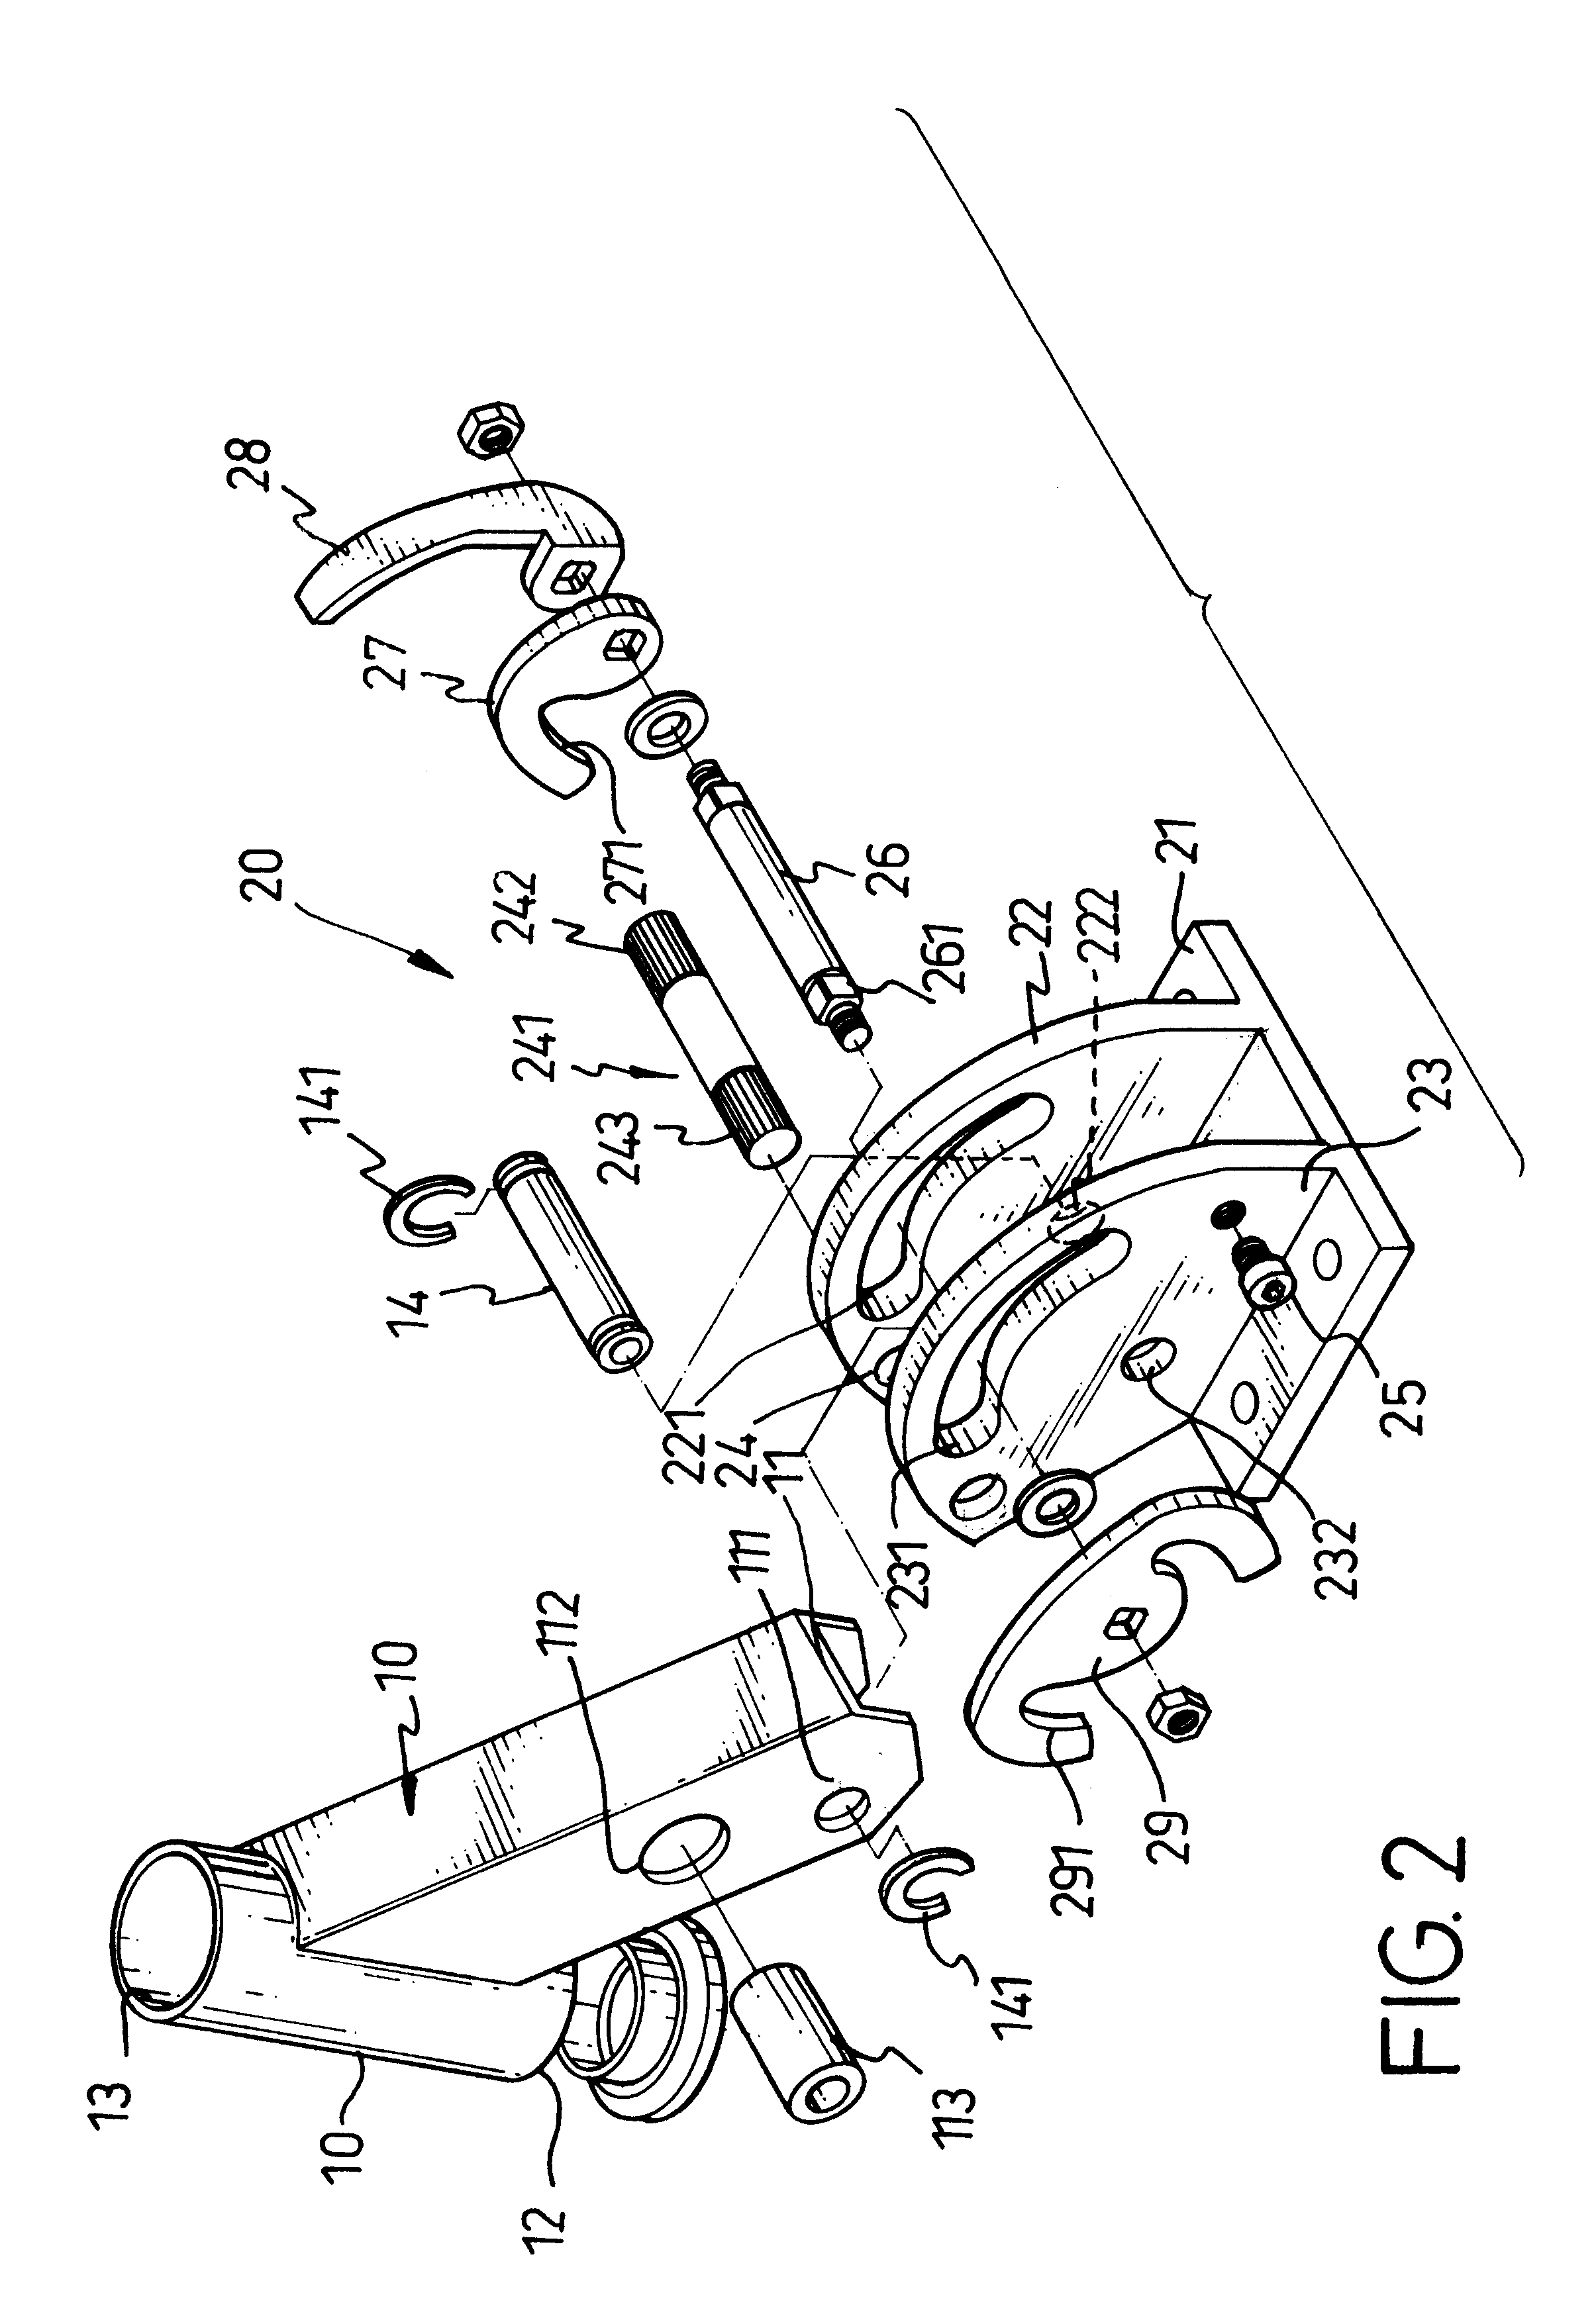 Foldable scooter with head tube assembly, brake and suspension